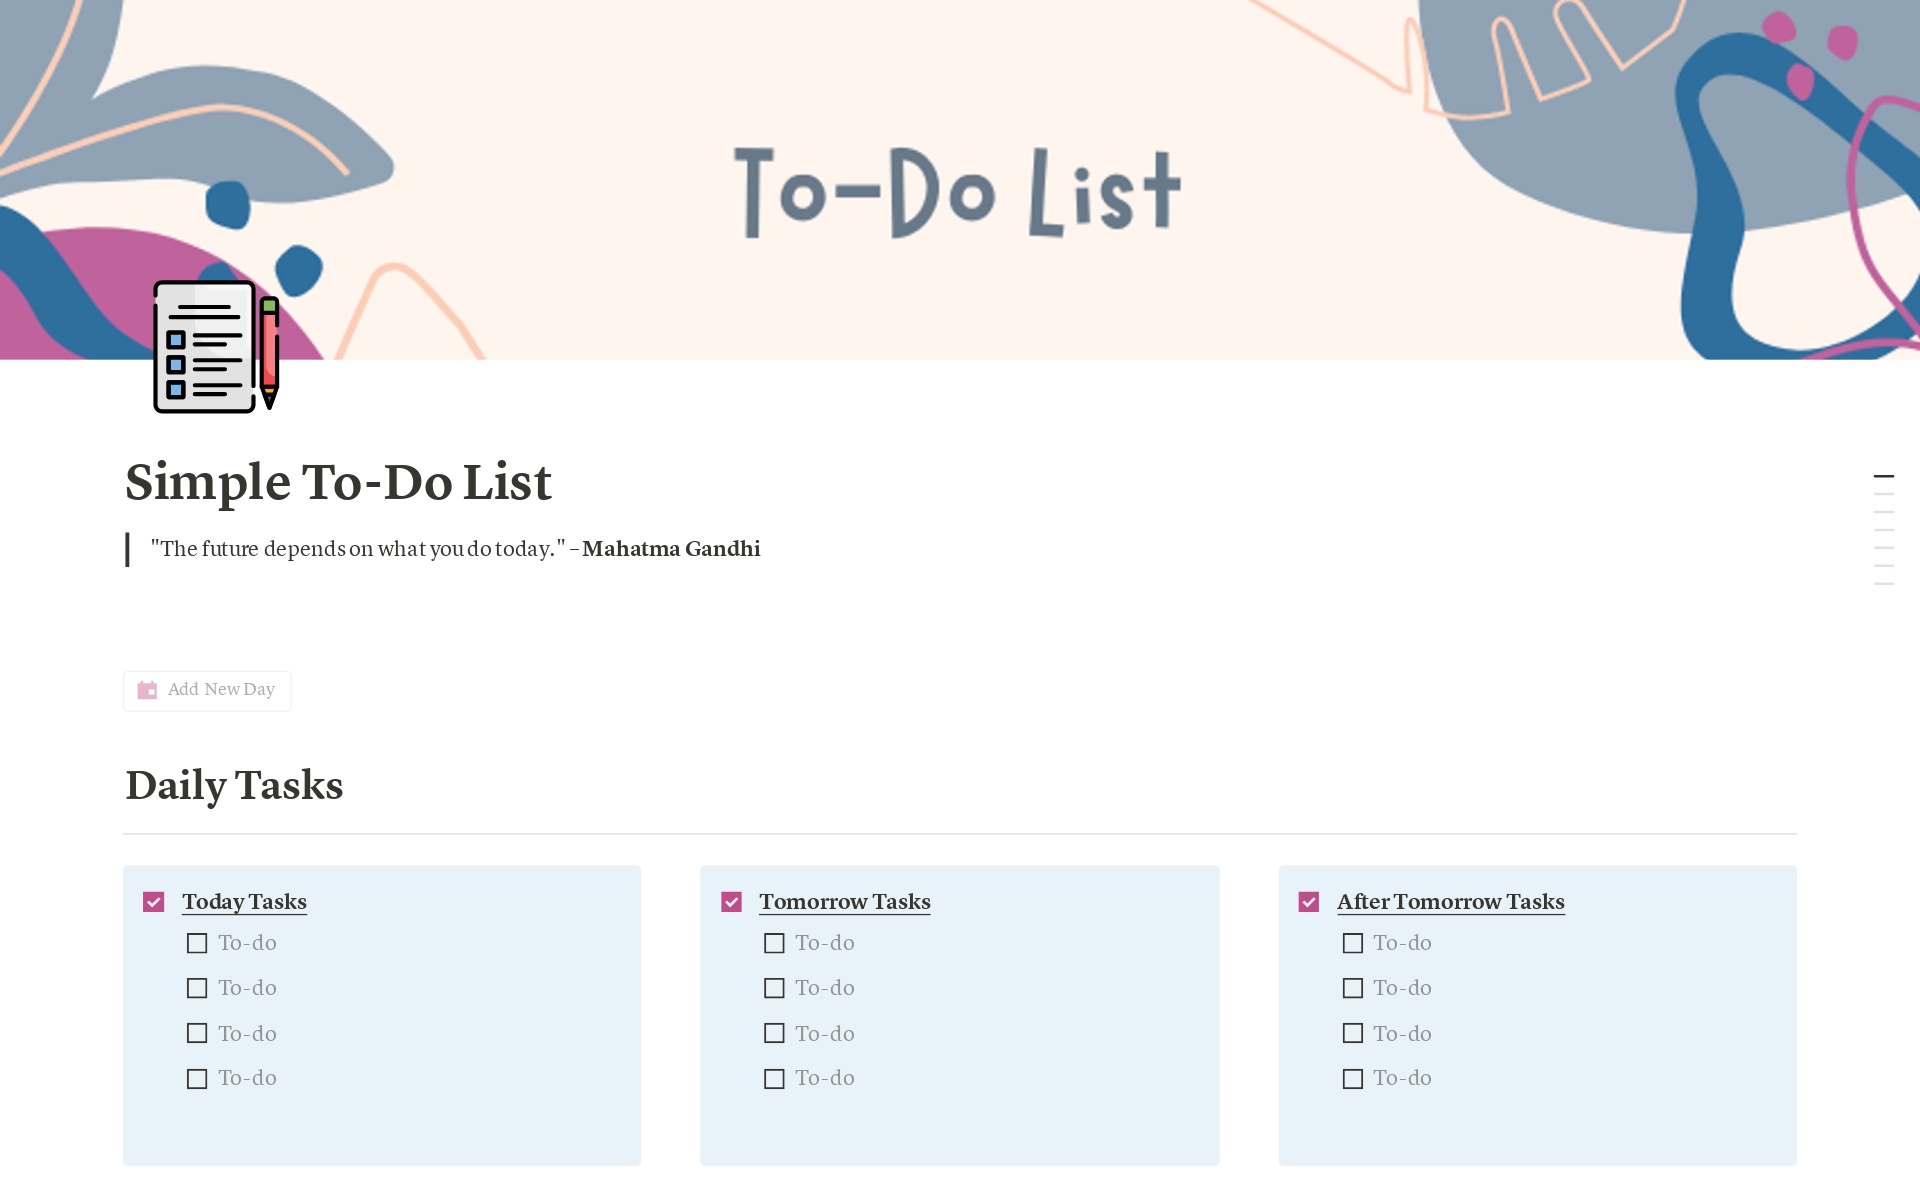 Organize your tasks efficiently with this comprehensive template for daily, weekly, and monthly planning. Stay on top of your goals with structured routines and focused tasks. Created by amiic.dev.

